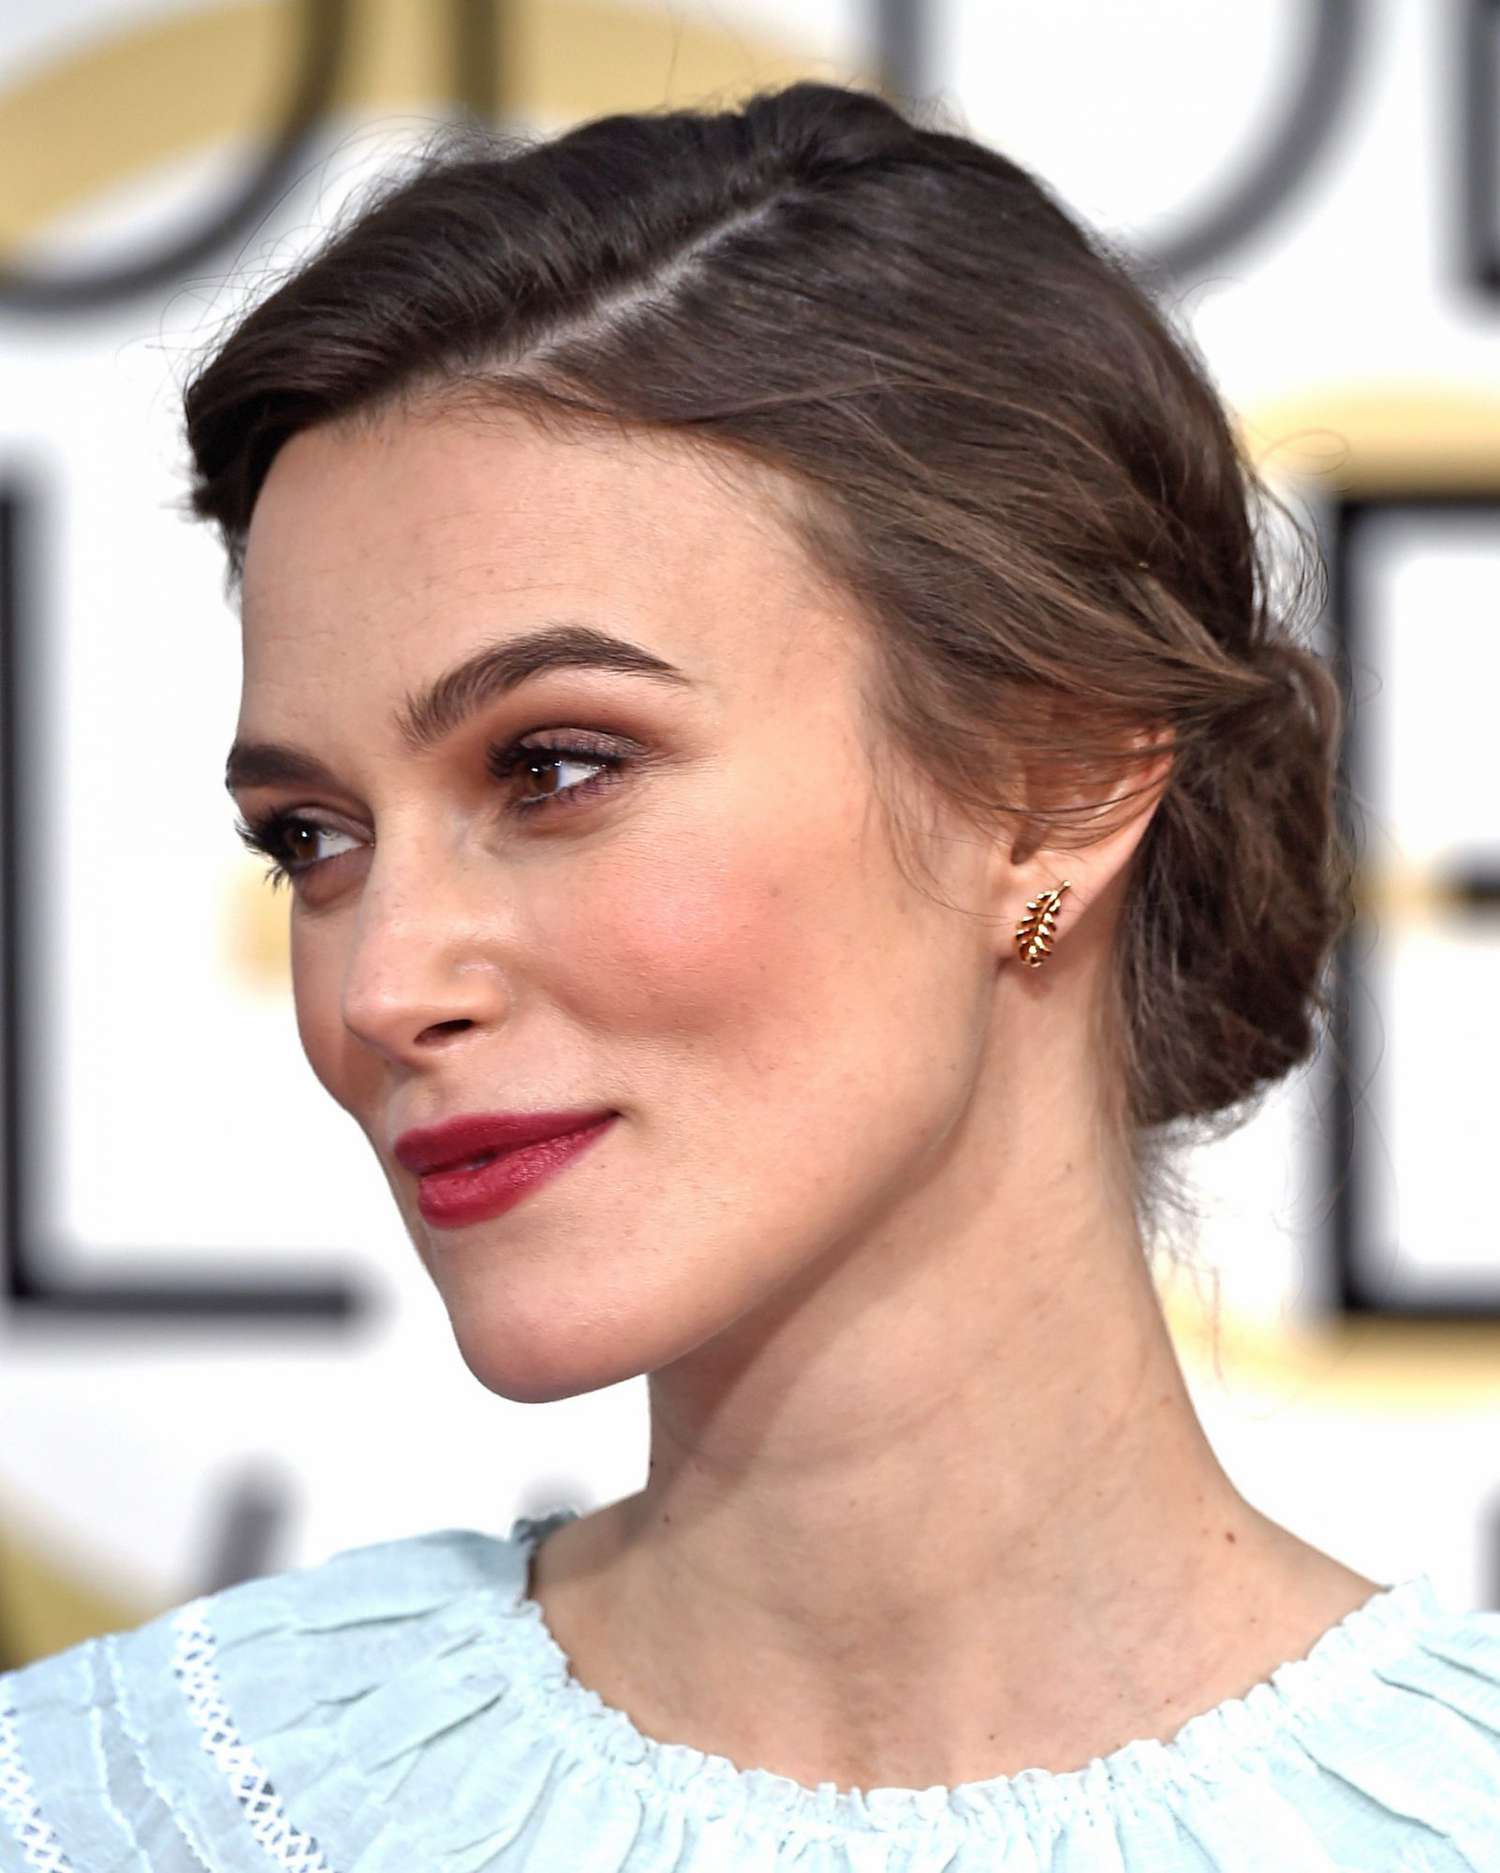 Keira Knightley's Embellished Chignon